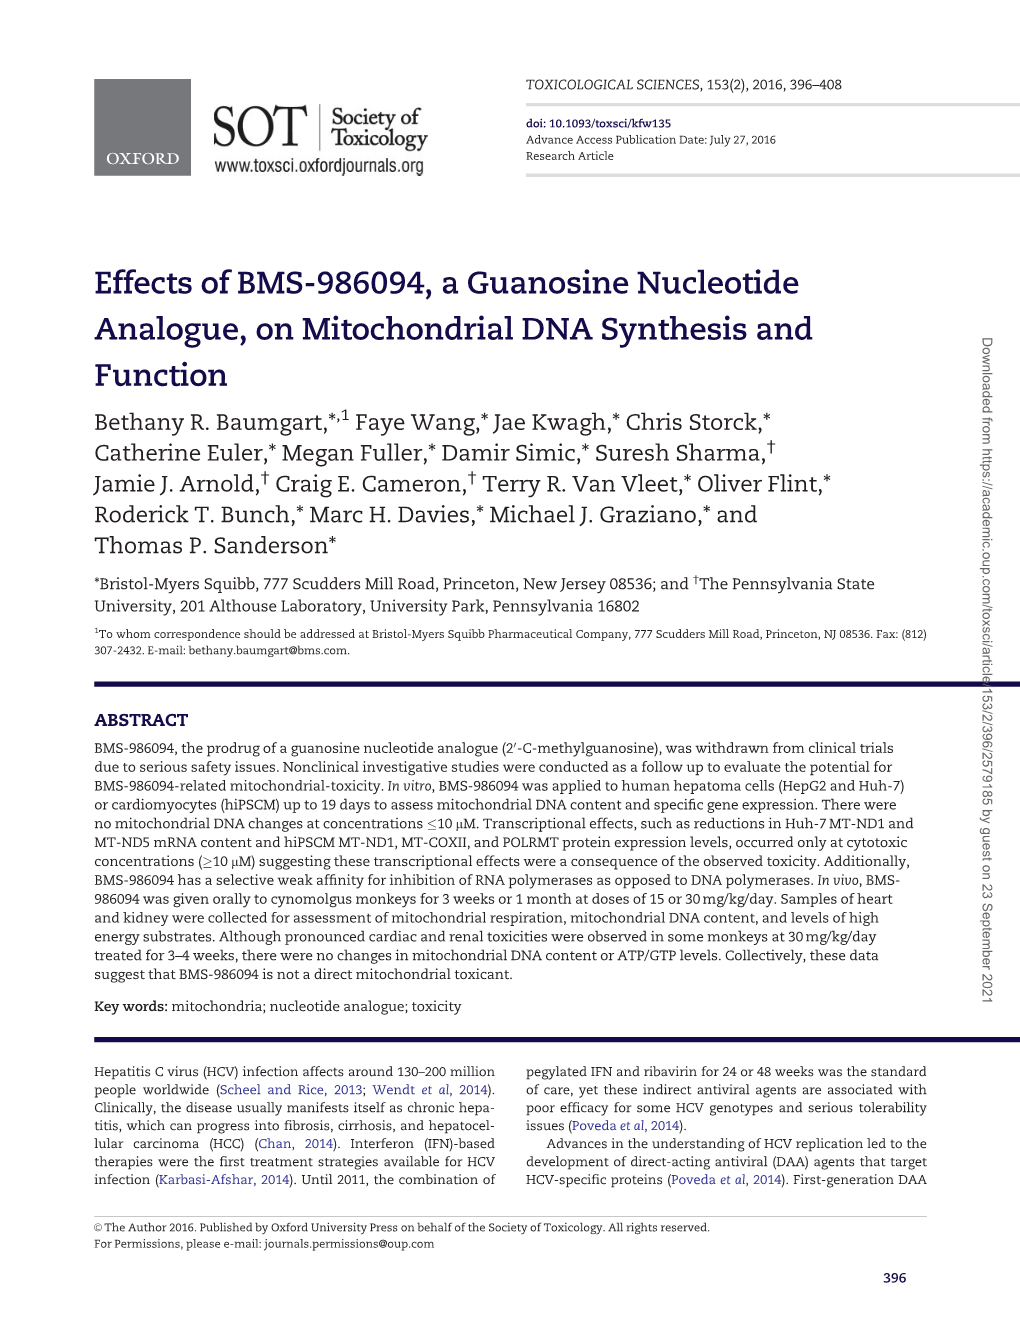 Effects of BMS-986094, a Guanosine Nucleotide Analogue, On